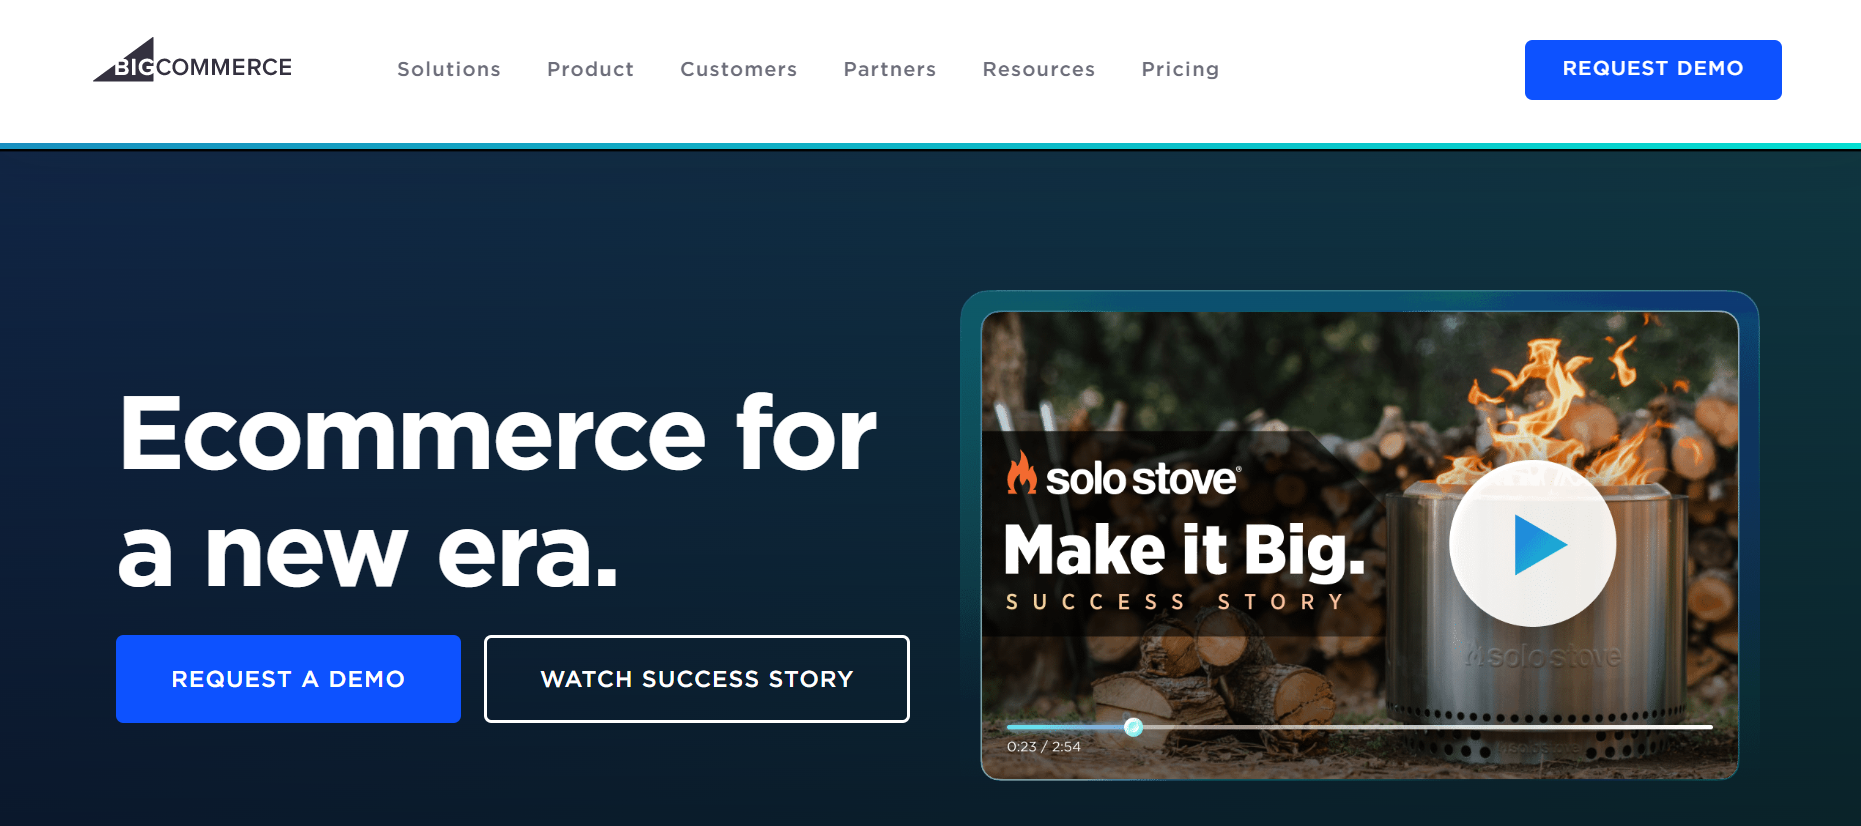 BigCommerce got the first shoutout in our Shopify competitors list